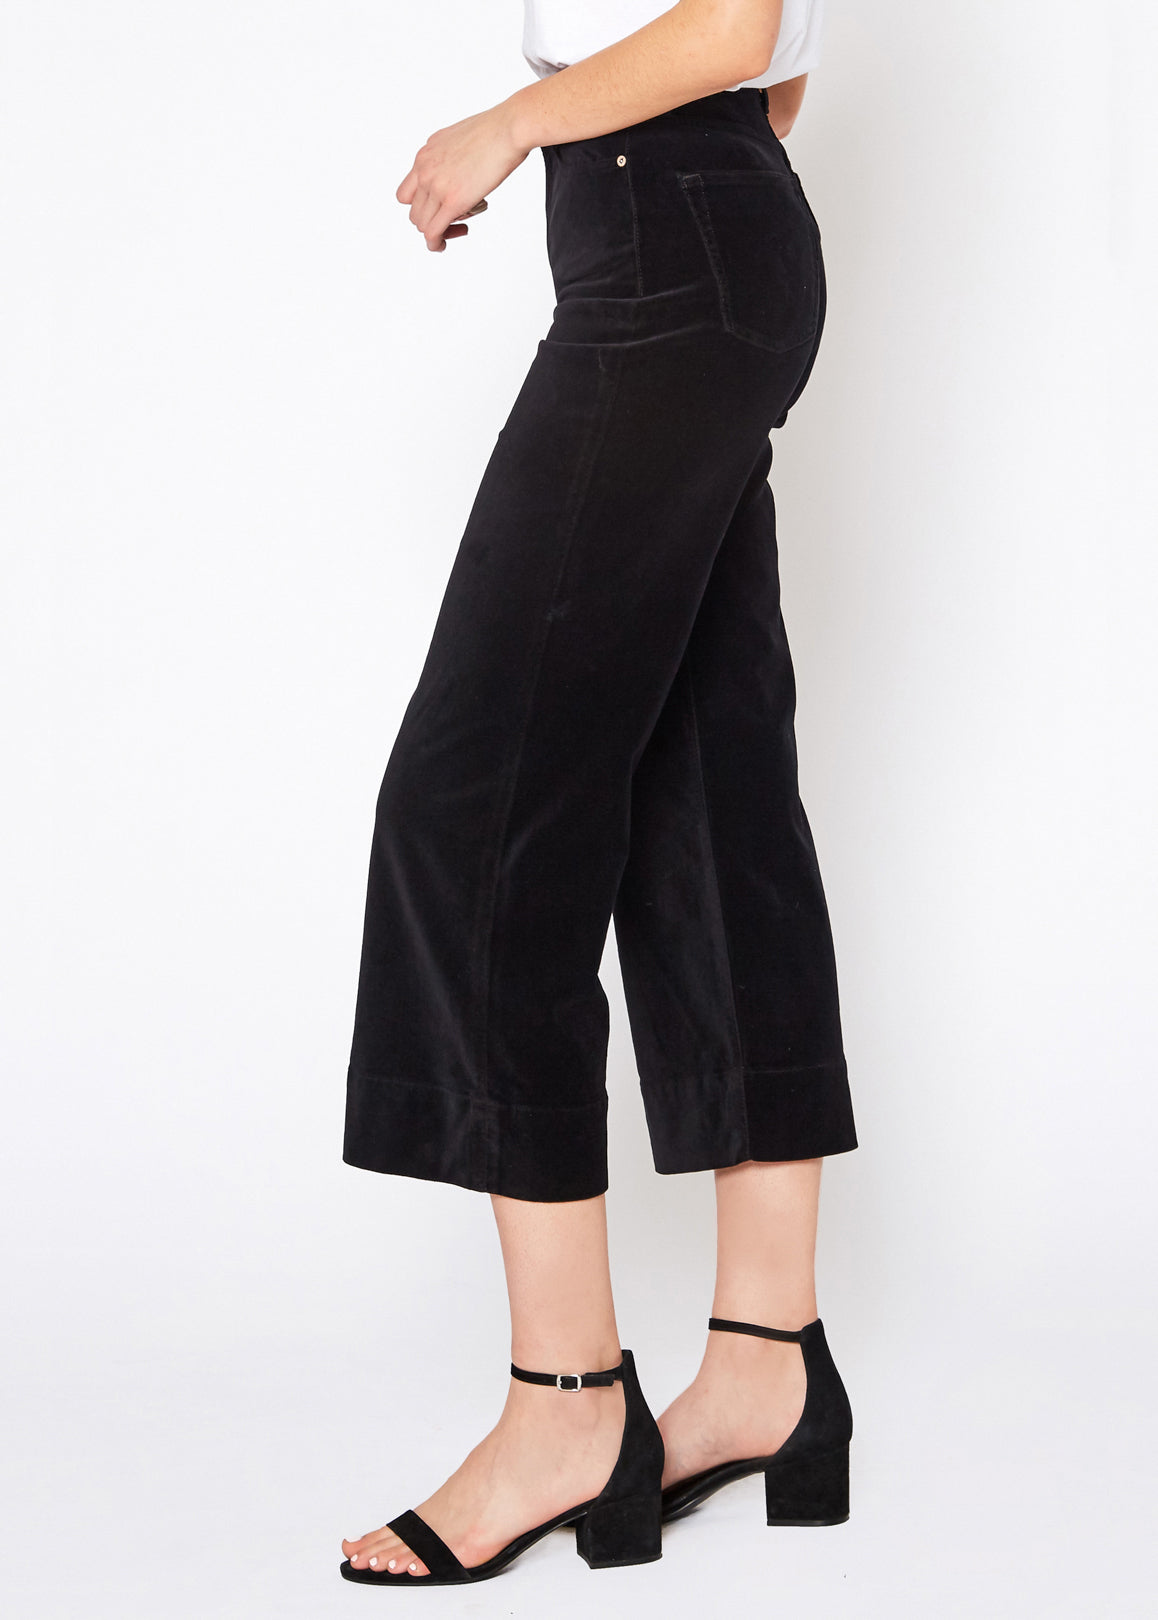 MARION - CULOTTE WIDE-LEGGED CROP (NIGHT OUT) - Noend Denim